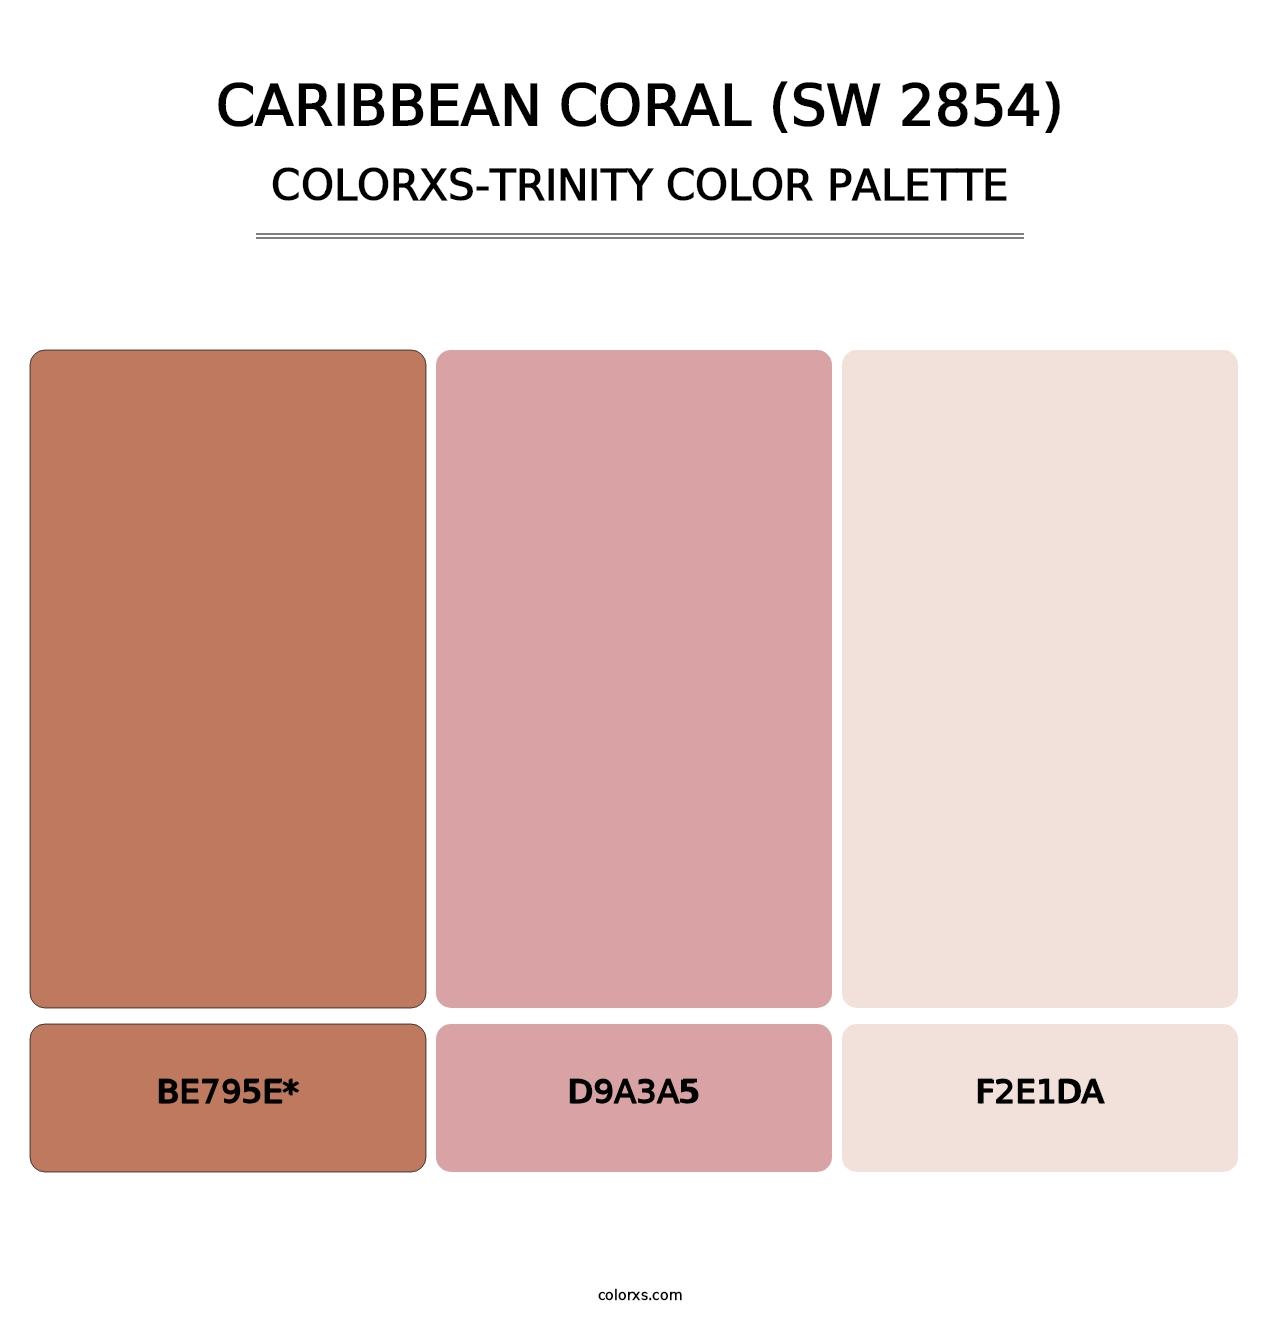 Caribbean Coral (SW 2854) - Colorxs Trinity Palette